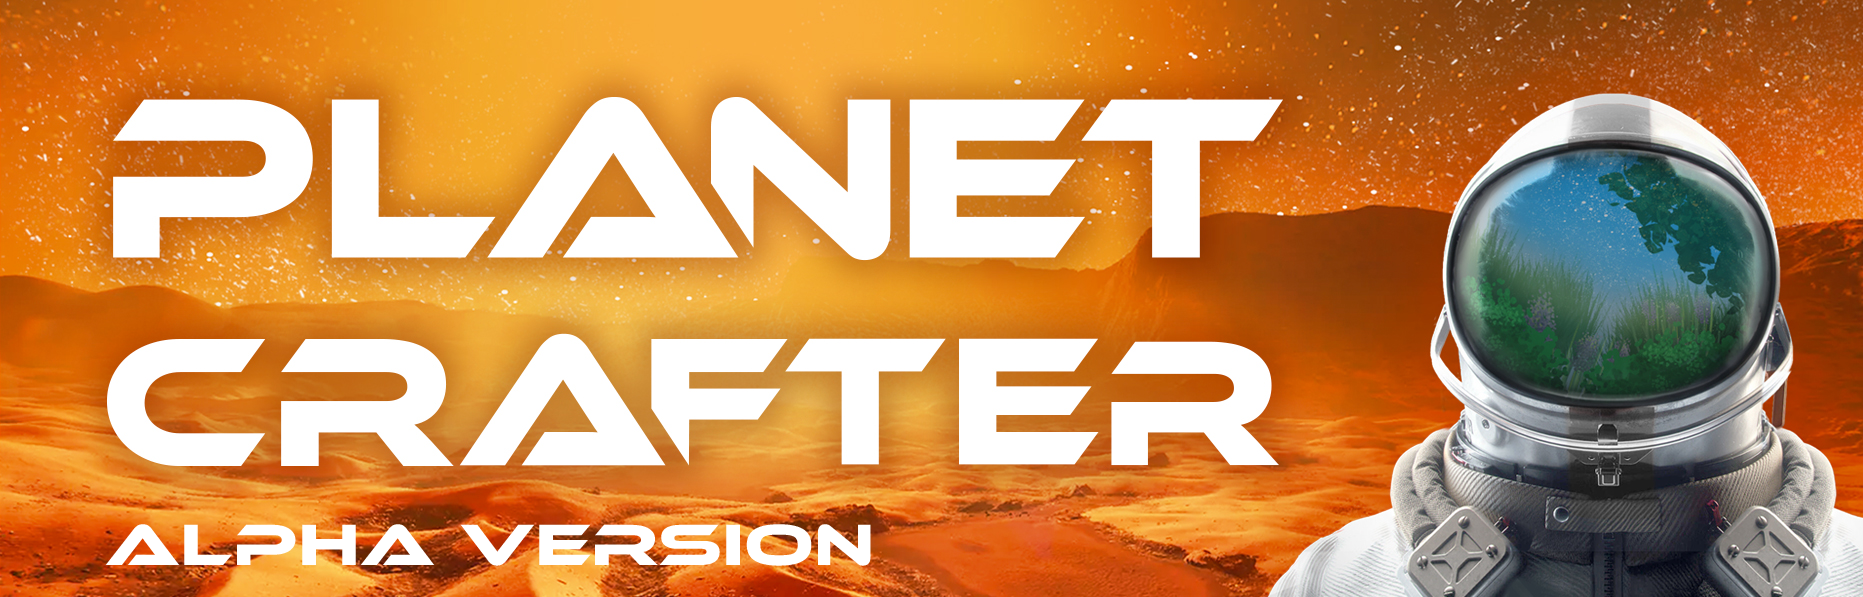 The Planet Crafter' is now available in Early Access